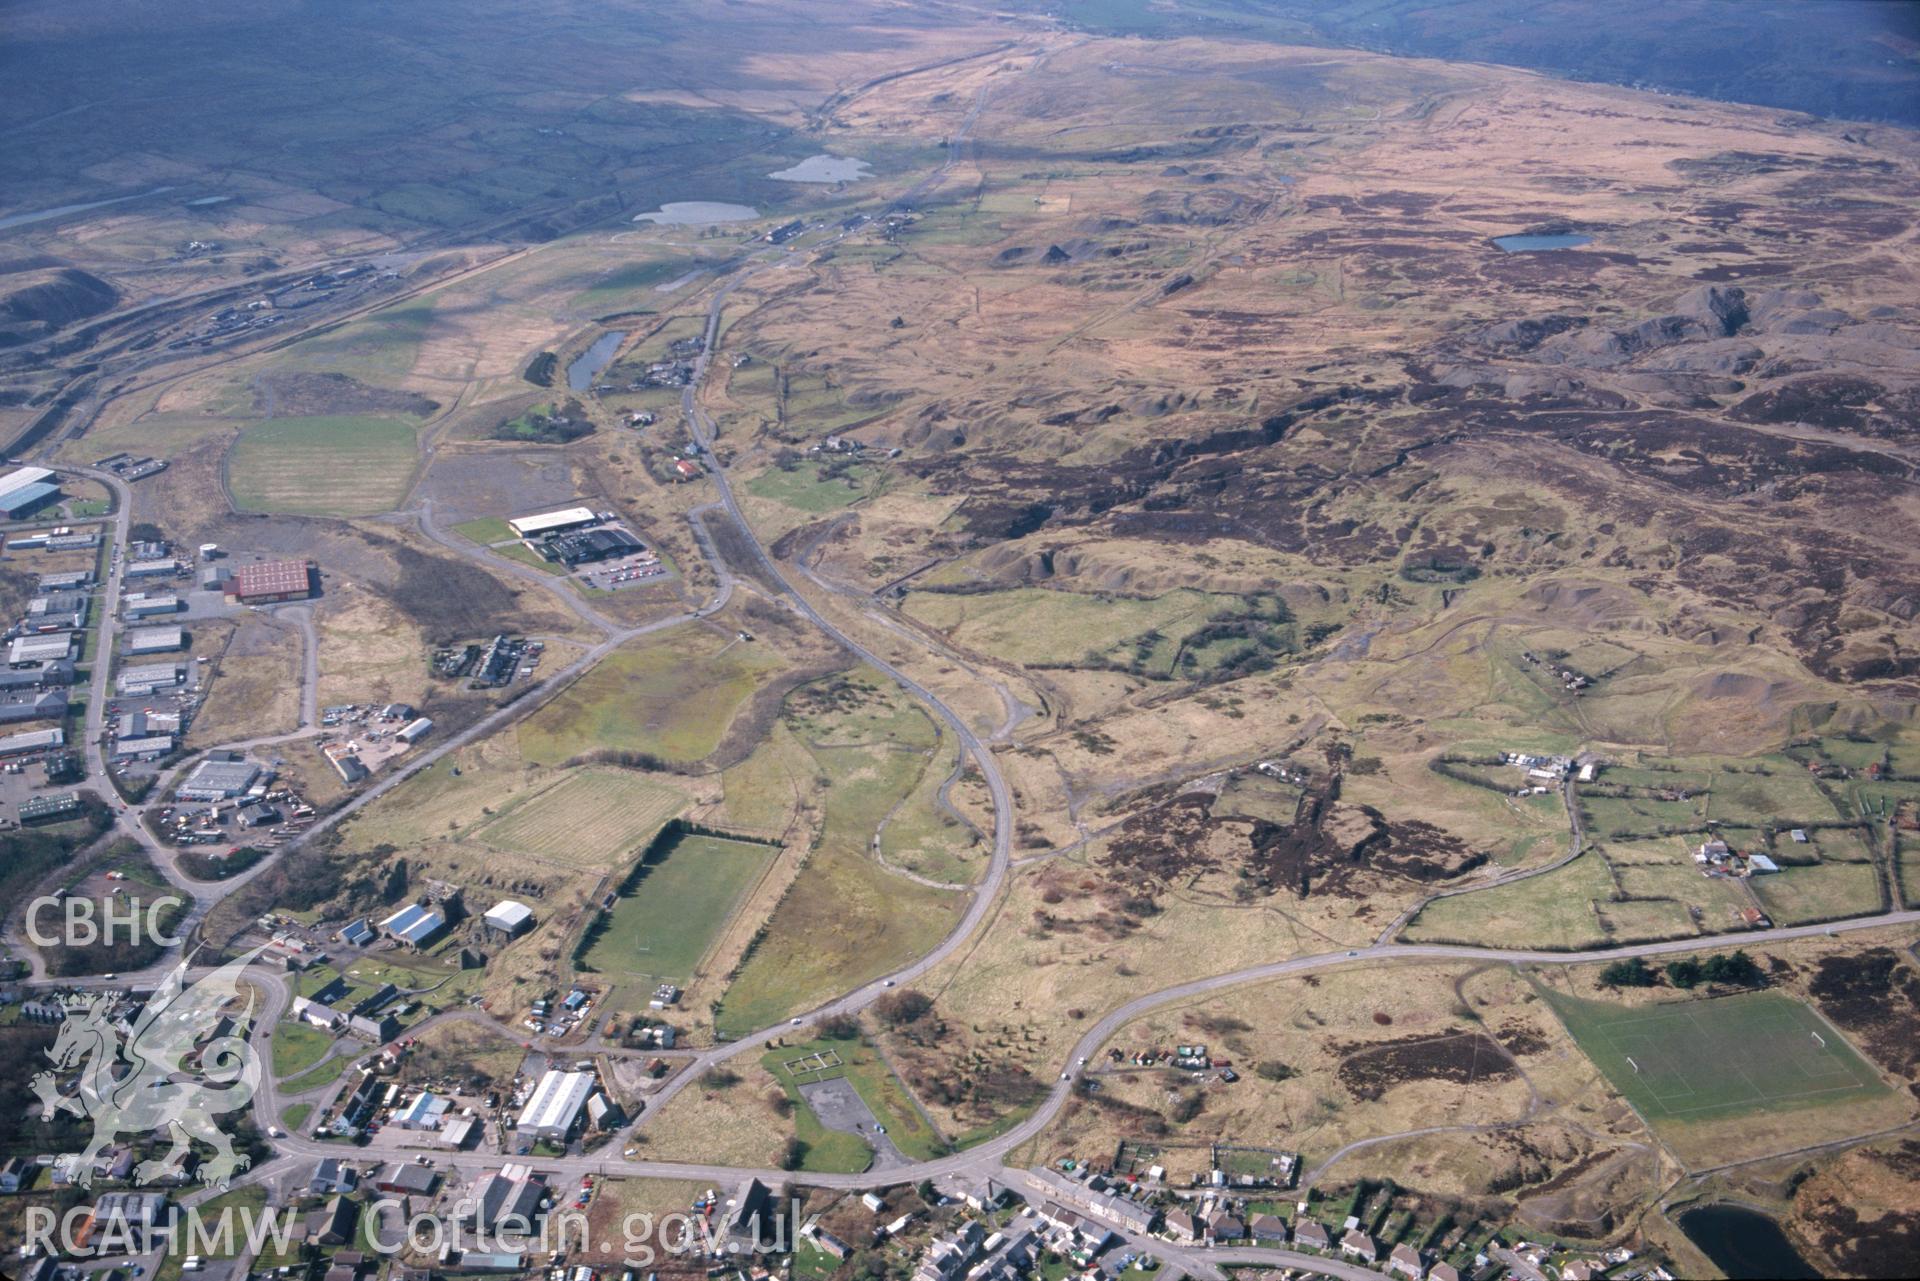 Slide of RCAHMW colour oblique aerial photograph of Blaenavon World Heritage Site Area, taken by T.G. Driver, 15/3/1999.